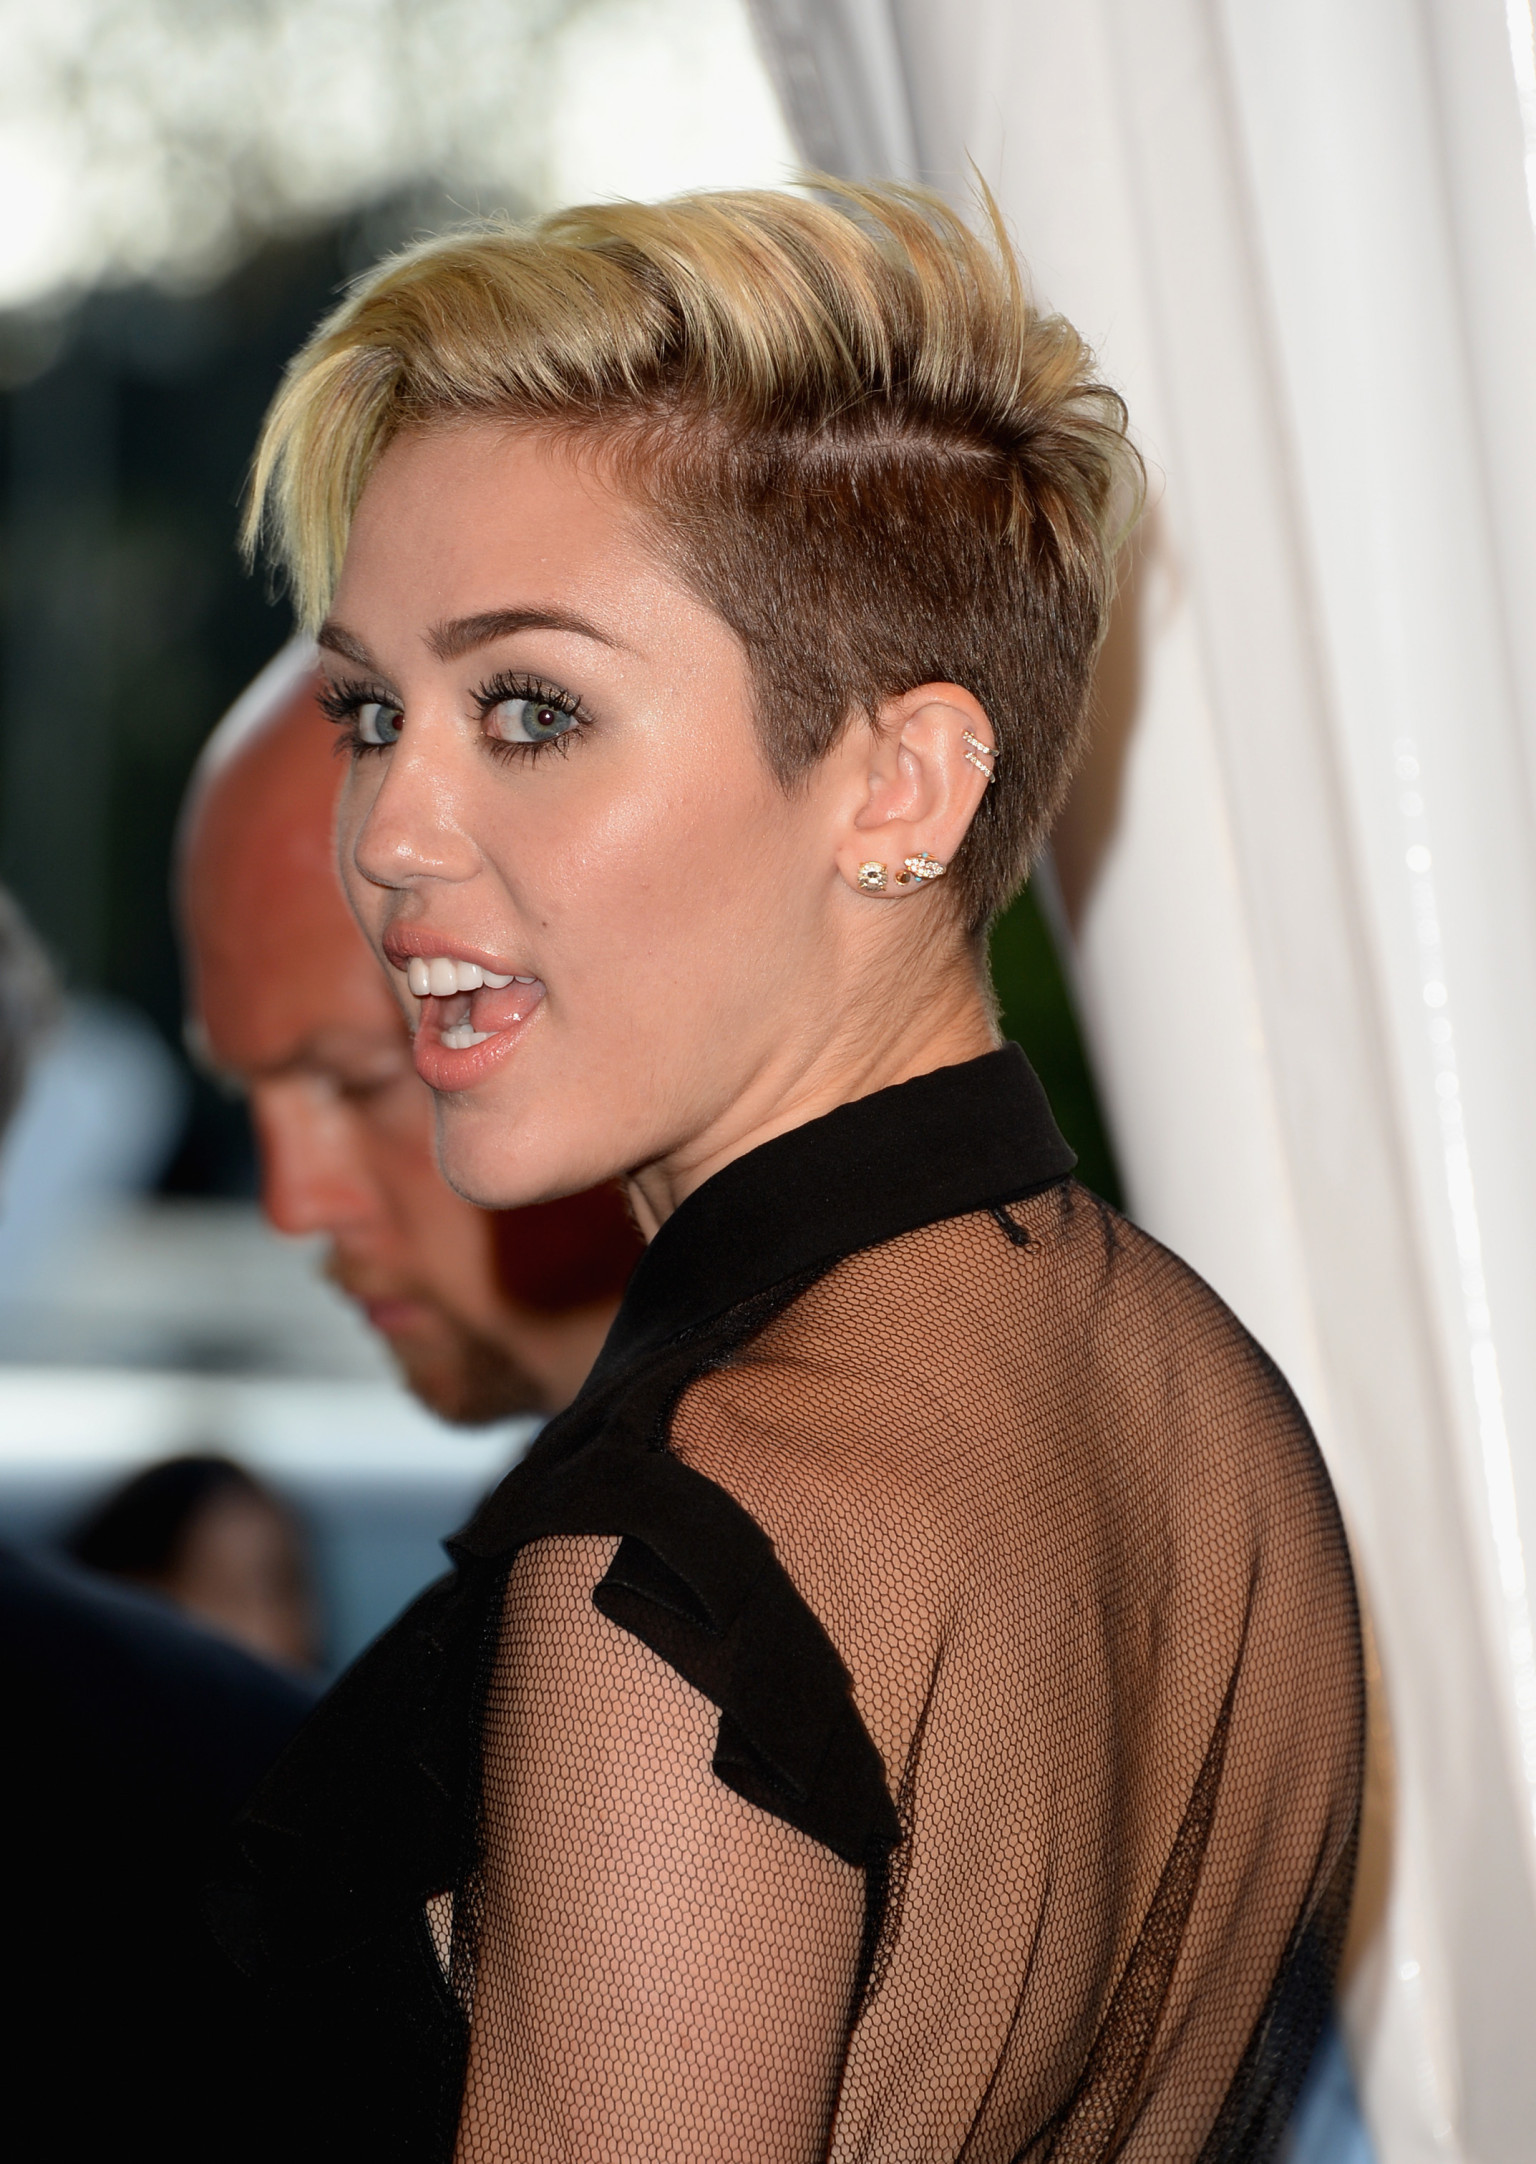 Of Course Miley's 'Wrecking Ball' Cover Features A No-Pants Miley. Of ...